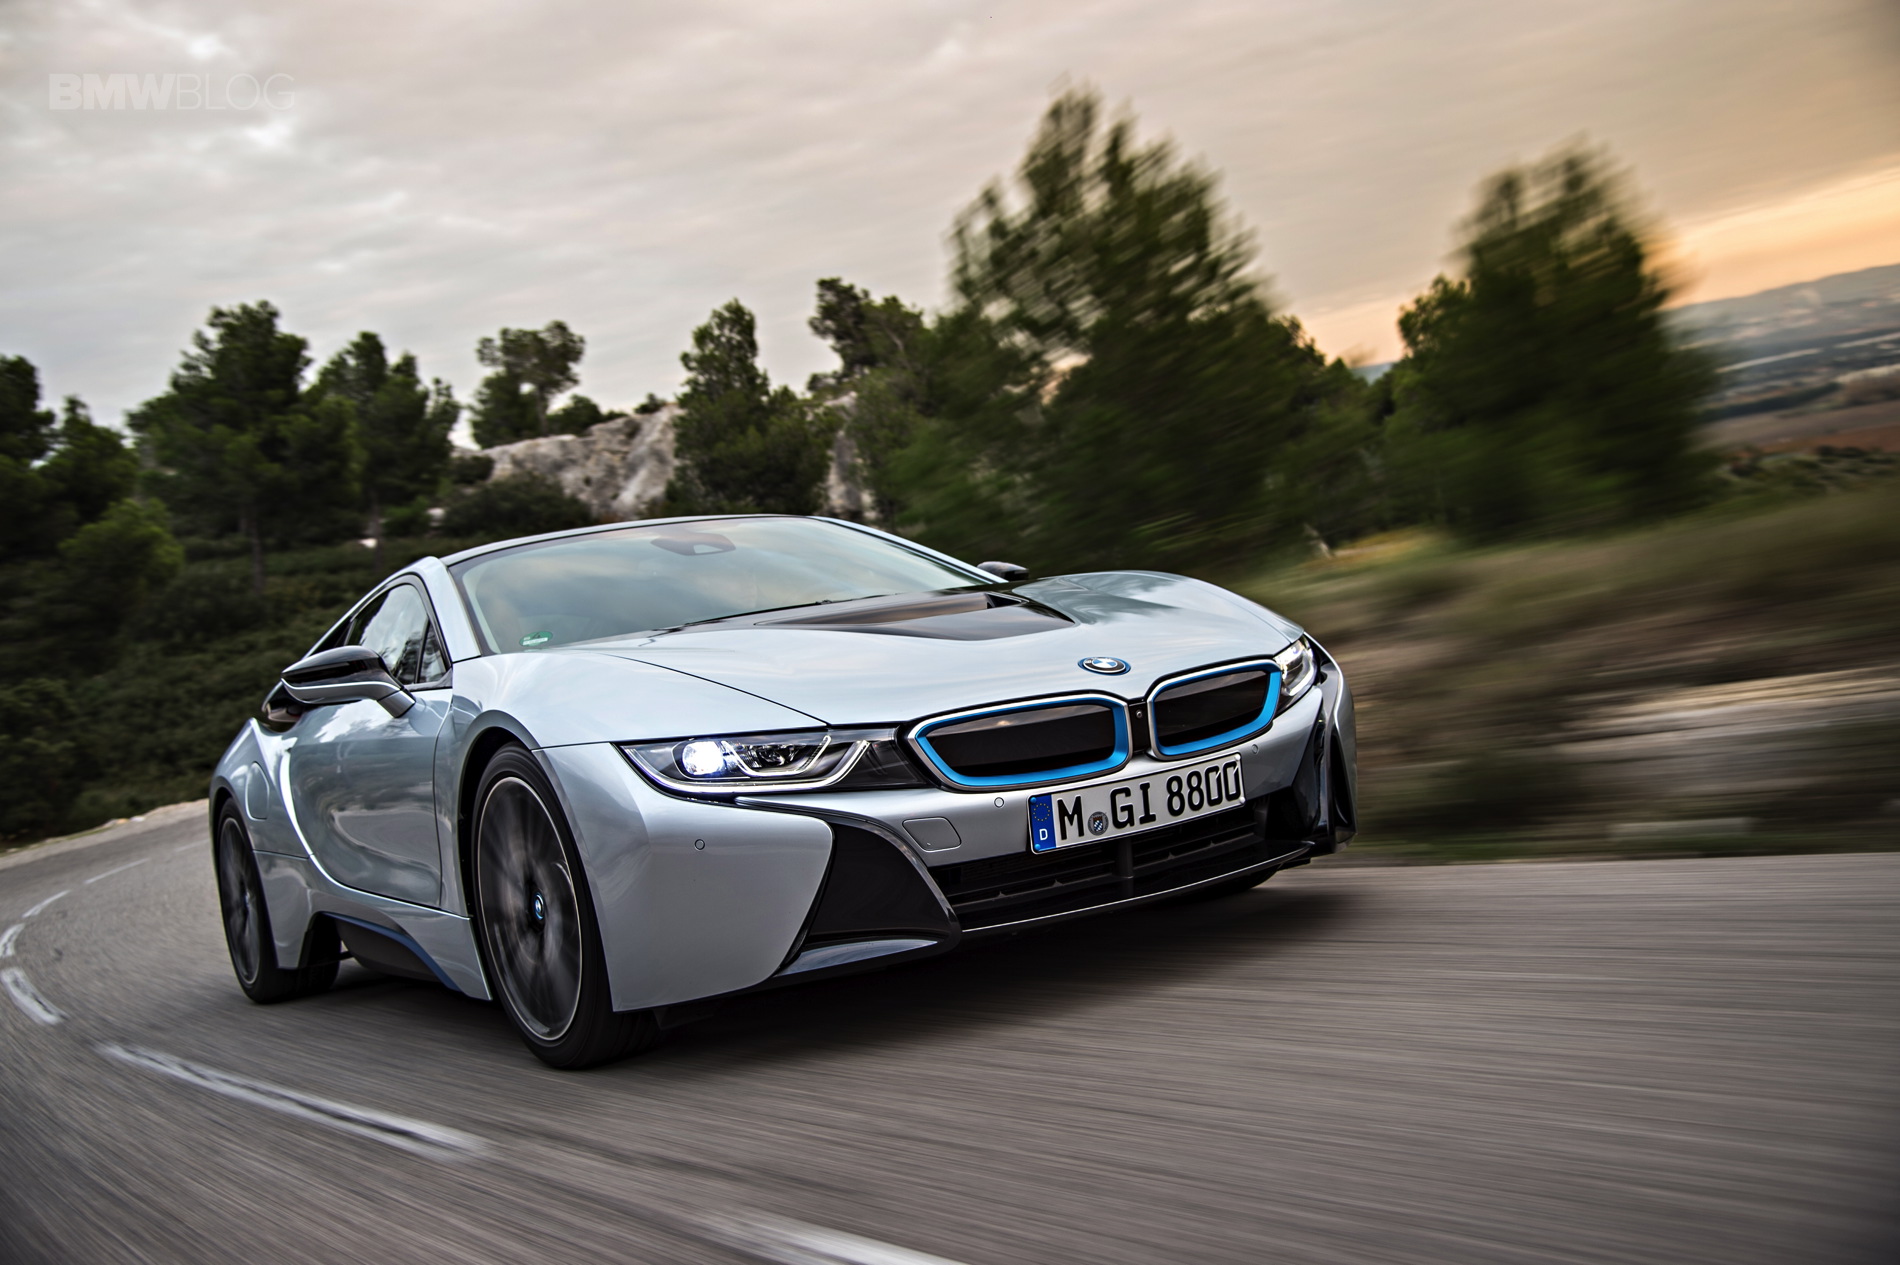 Bmw i8 pictures